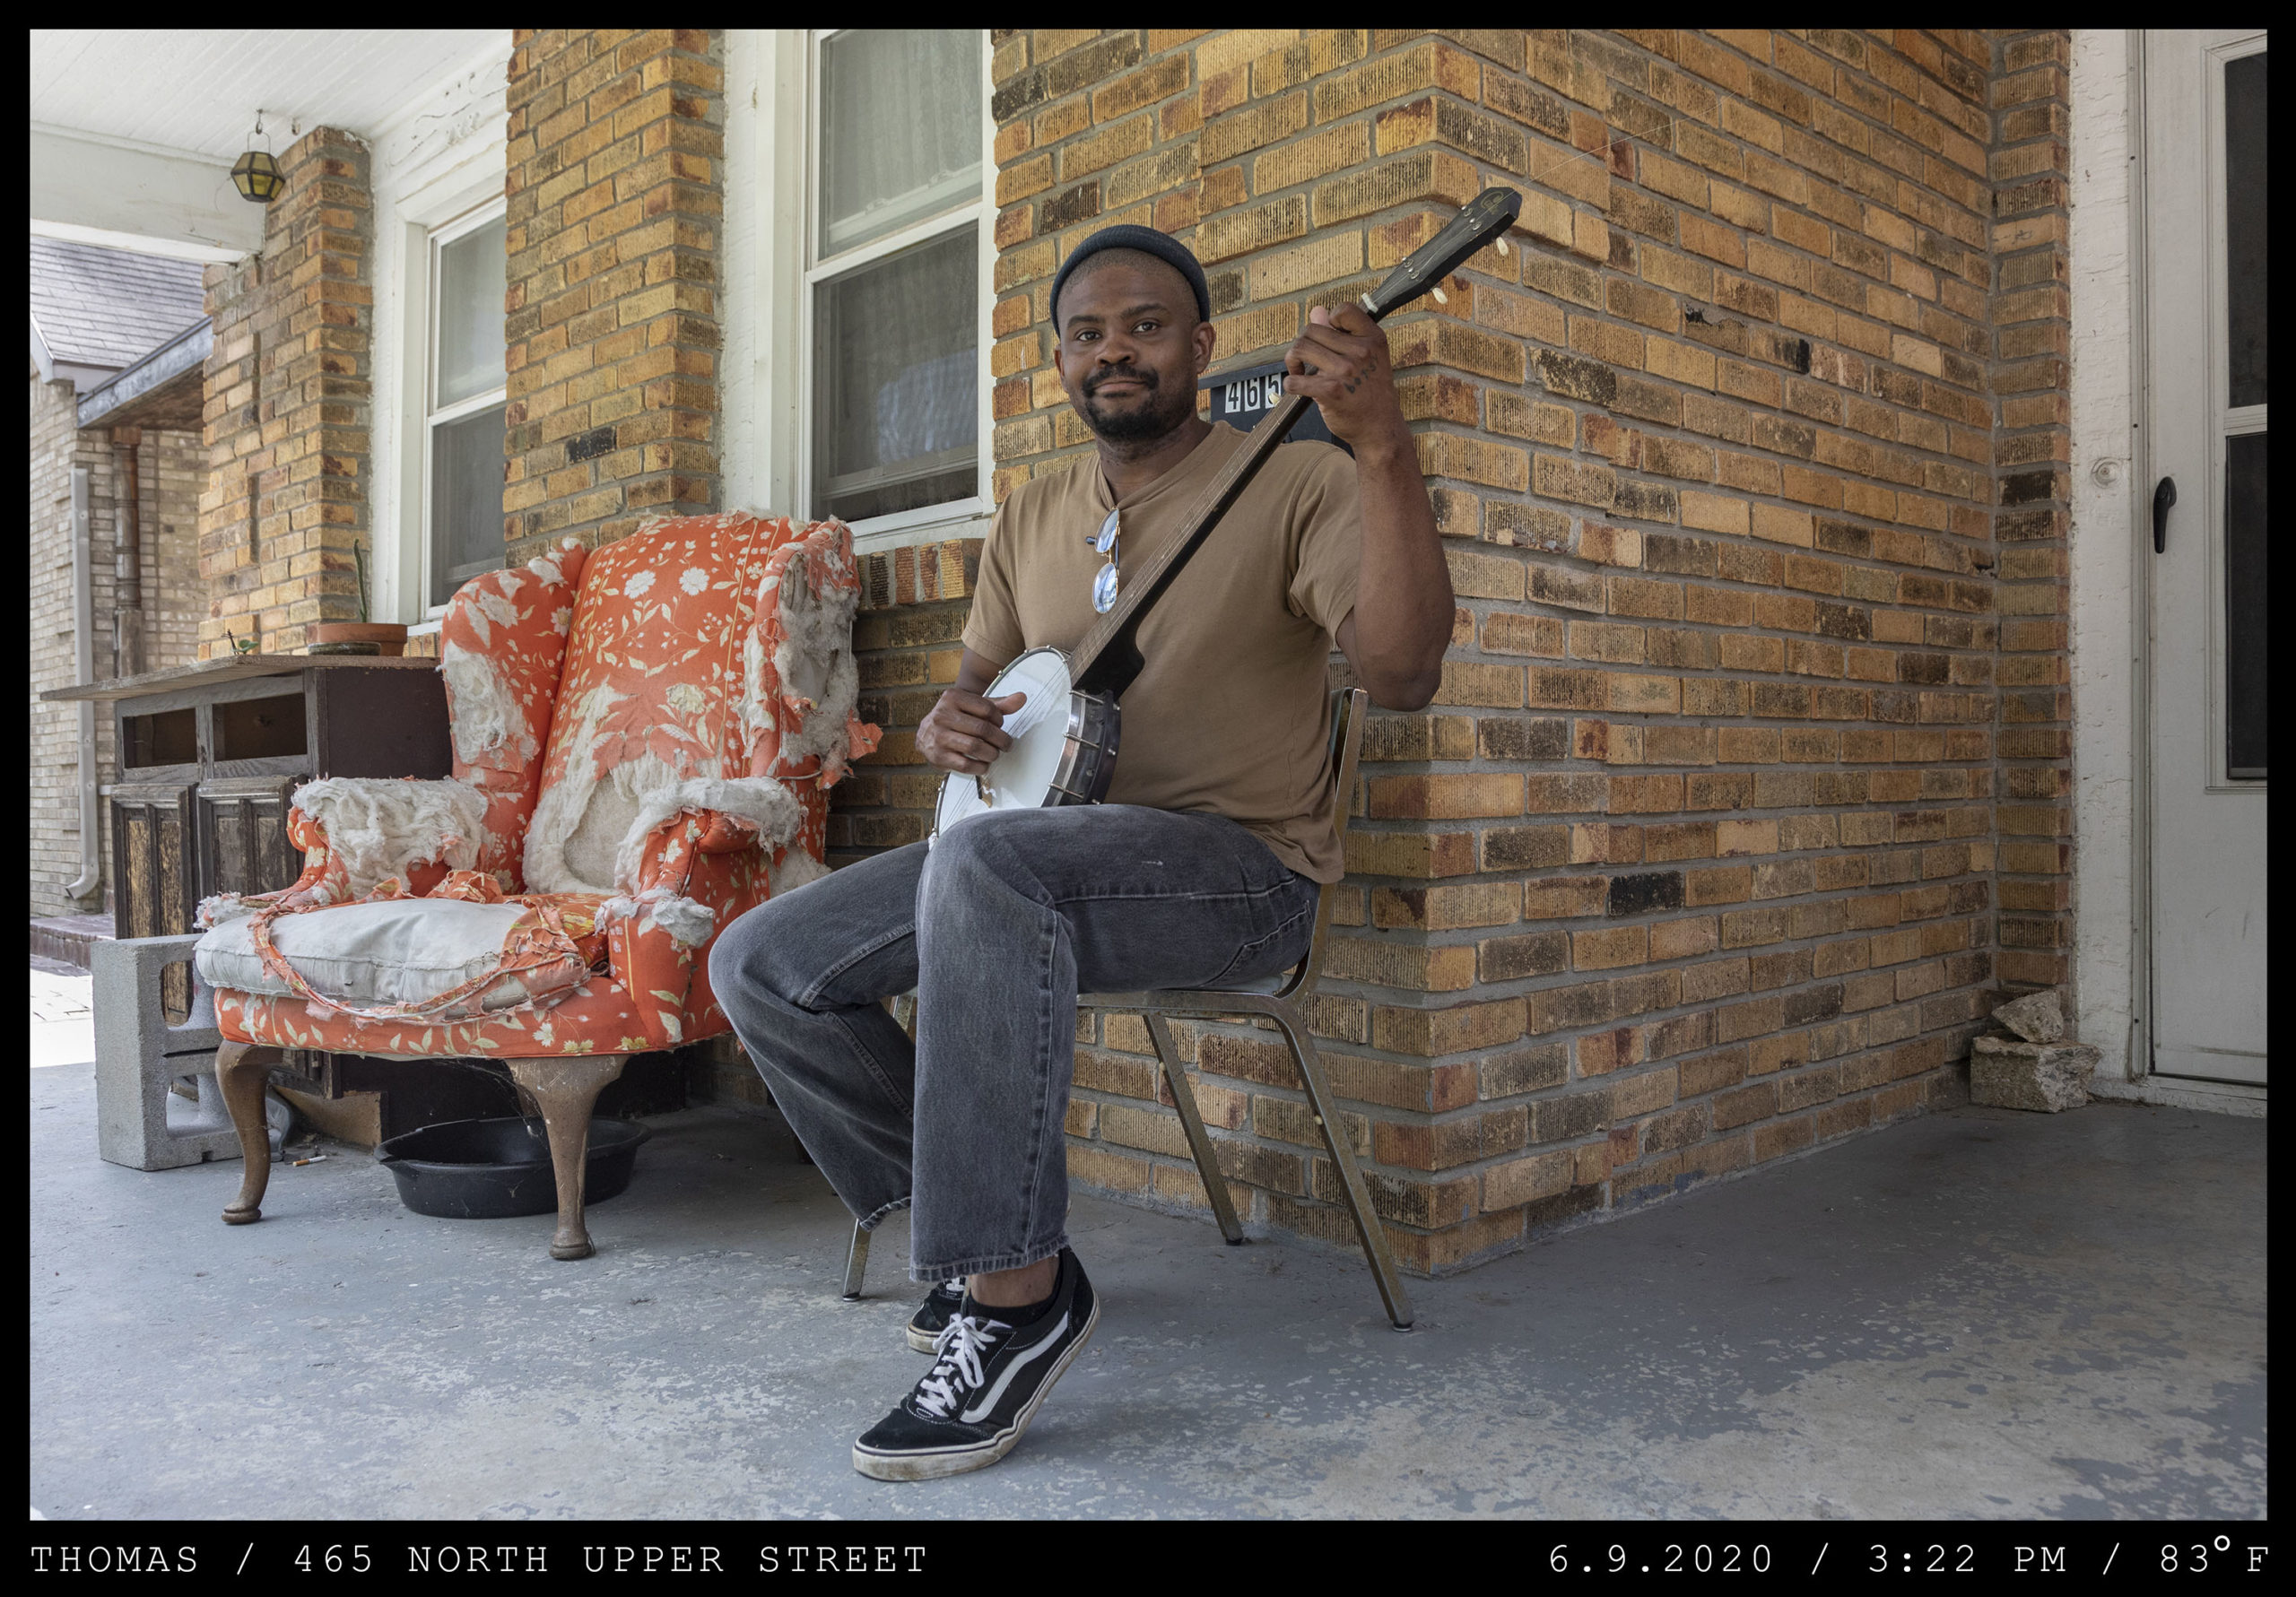 A young man with a beard and cap is seated on the front porch of a brick duplex holding a banjo seated next to a well worn orange upholstered chair.